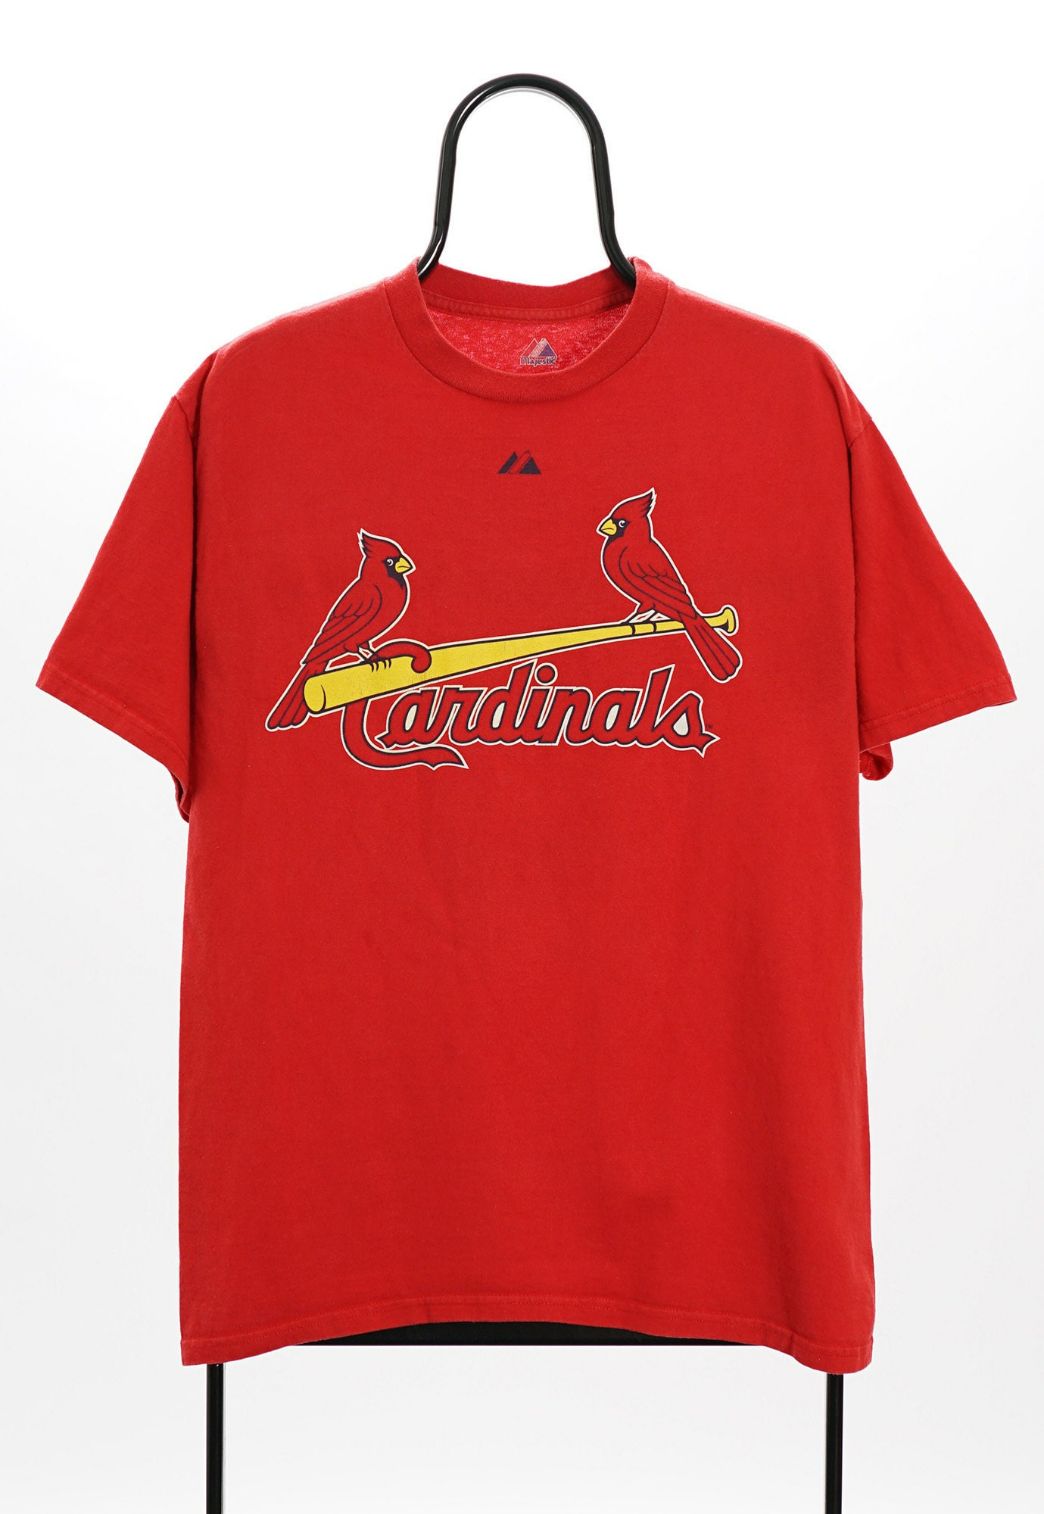 Majestic Mlb Vintage Red St Louis Cardinals T-Shirt